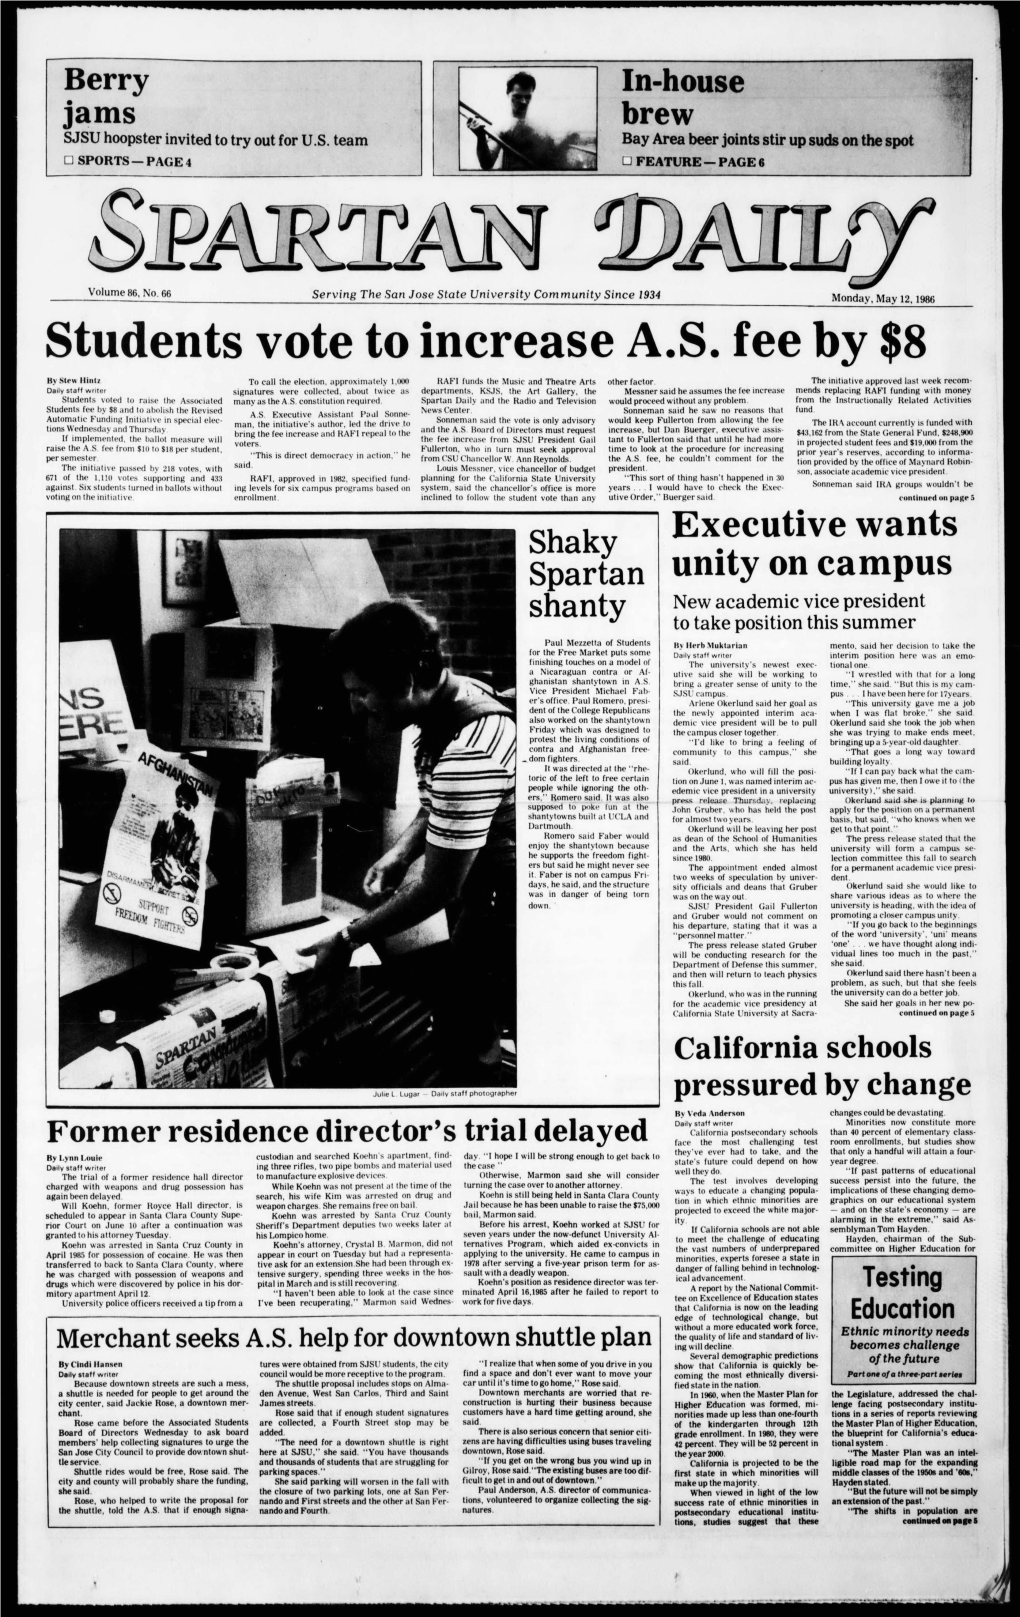 Students Vote to Increase A.S. Fee by $8 by Stew Hintz to Call the Election, Approximately 1,000 RAFI Funds the Music and Theatre Arts Other Factor